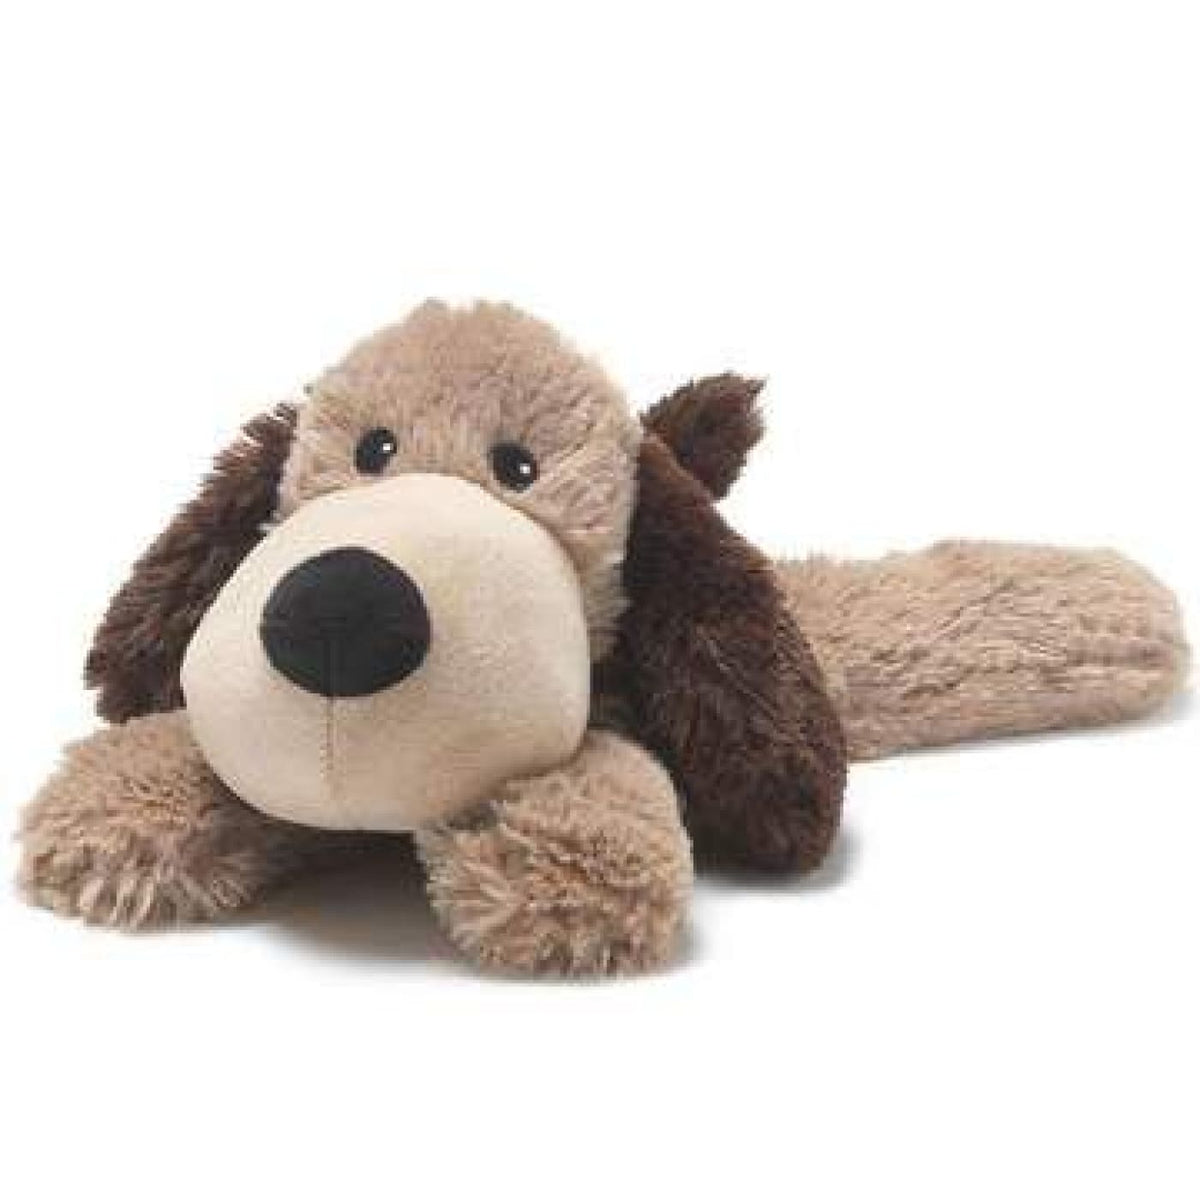 Warmies Cozy Plush - Grey Puppy - Grey Puppy - HEALTH &amp; HOME SAFETY - THERMOMETERS/MEDICINAL